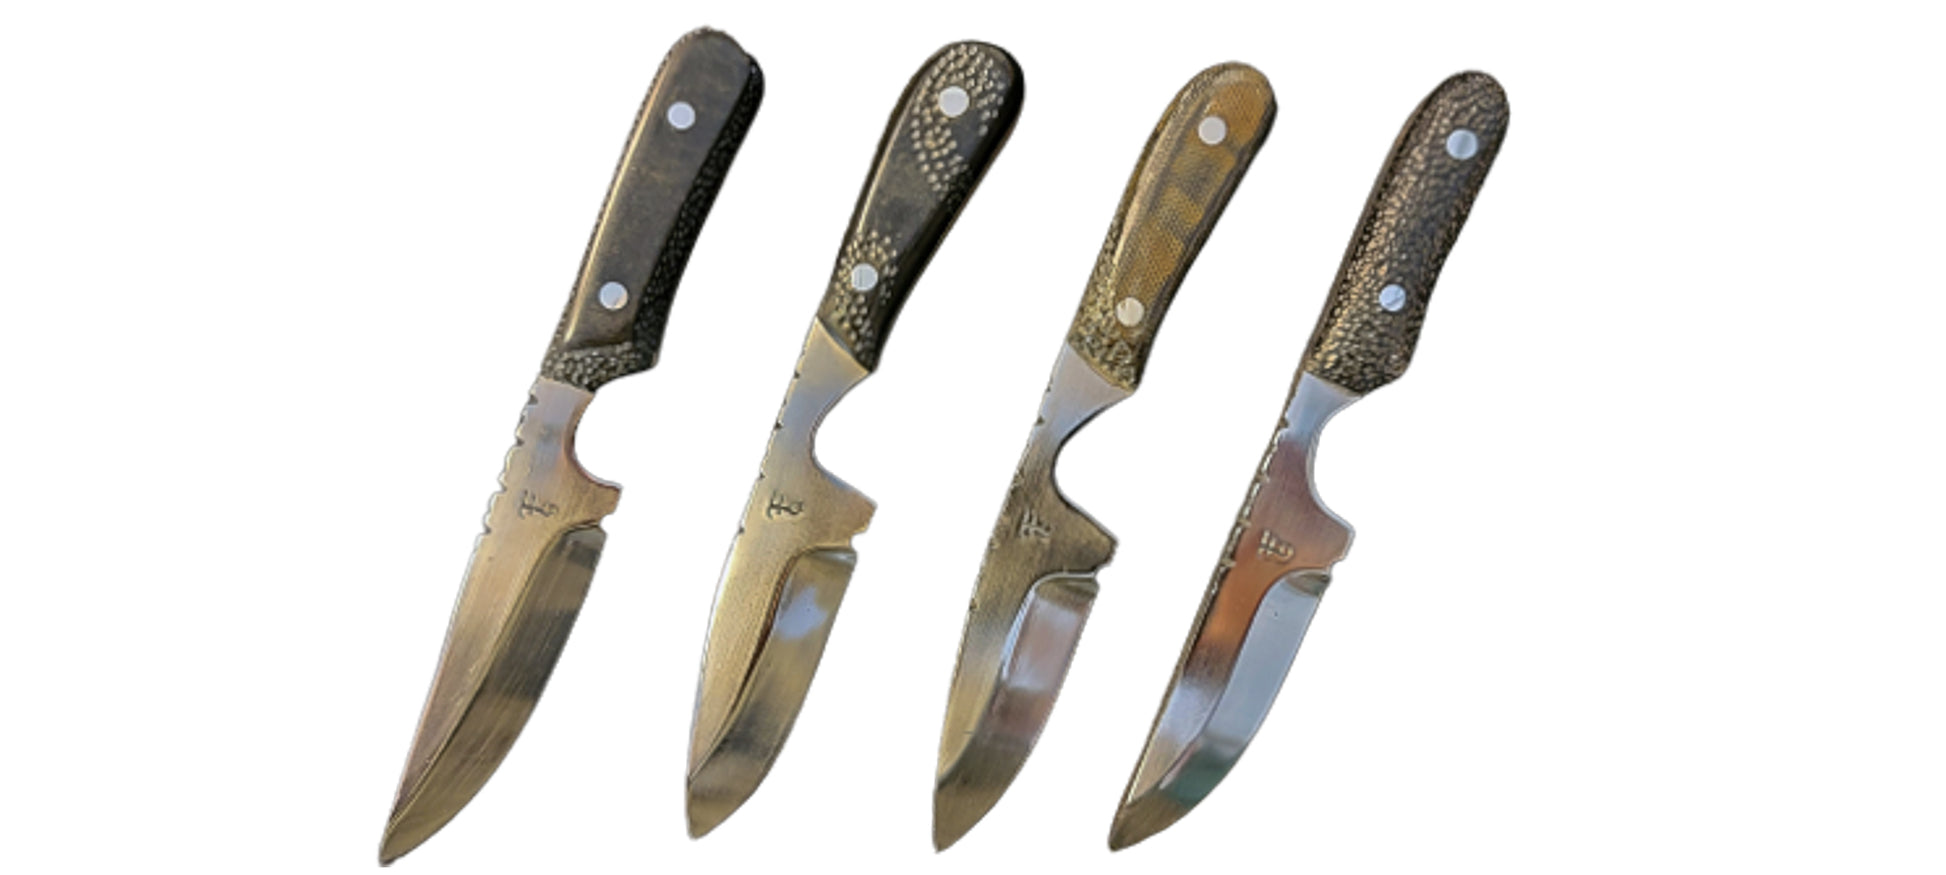 The Crawdads have slight variations.  Being handmade, no two knives are exactly alike.  These knives are made to order and will take 2-3 weeks for delivery.